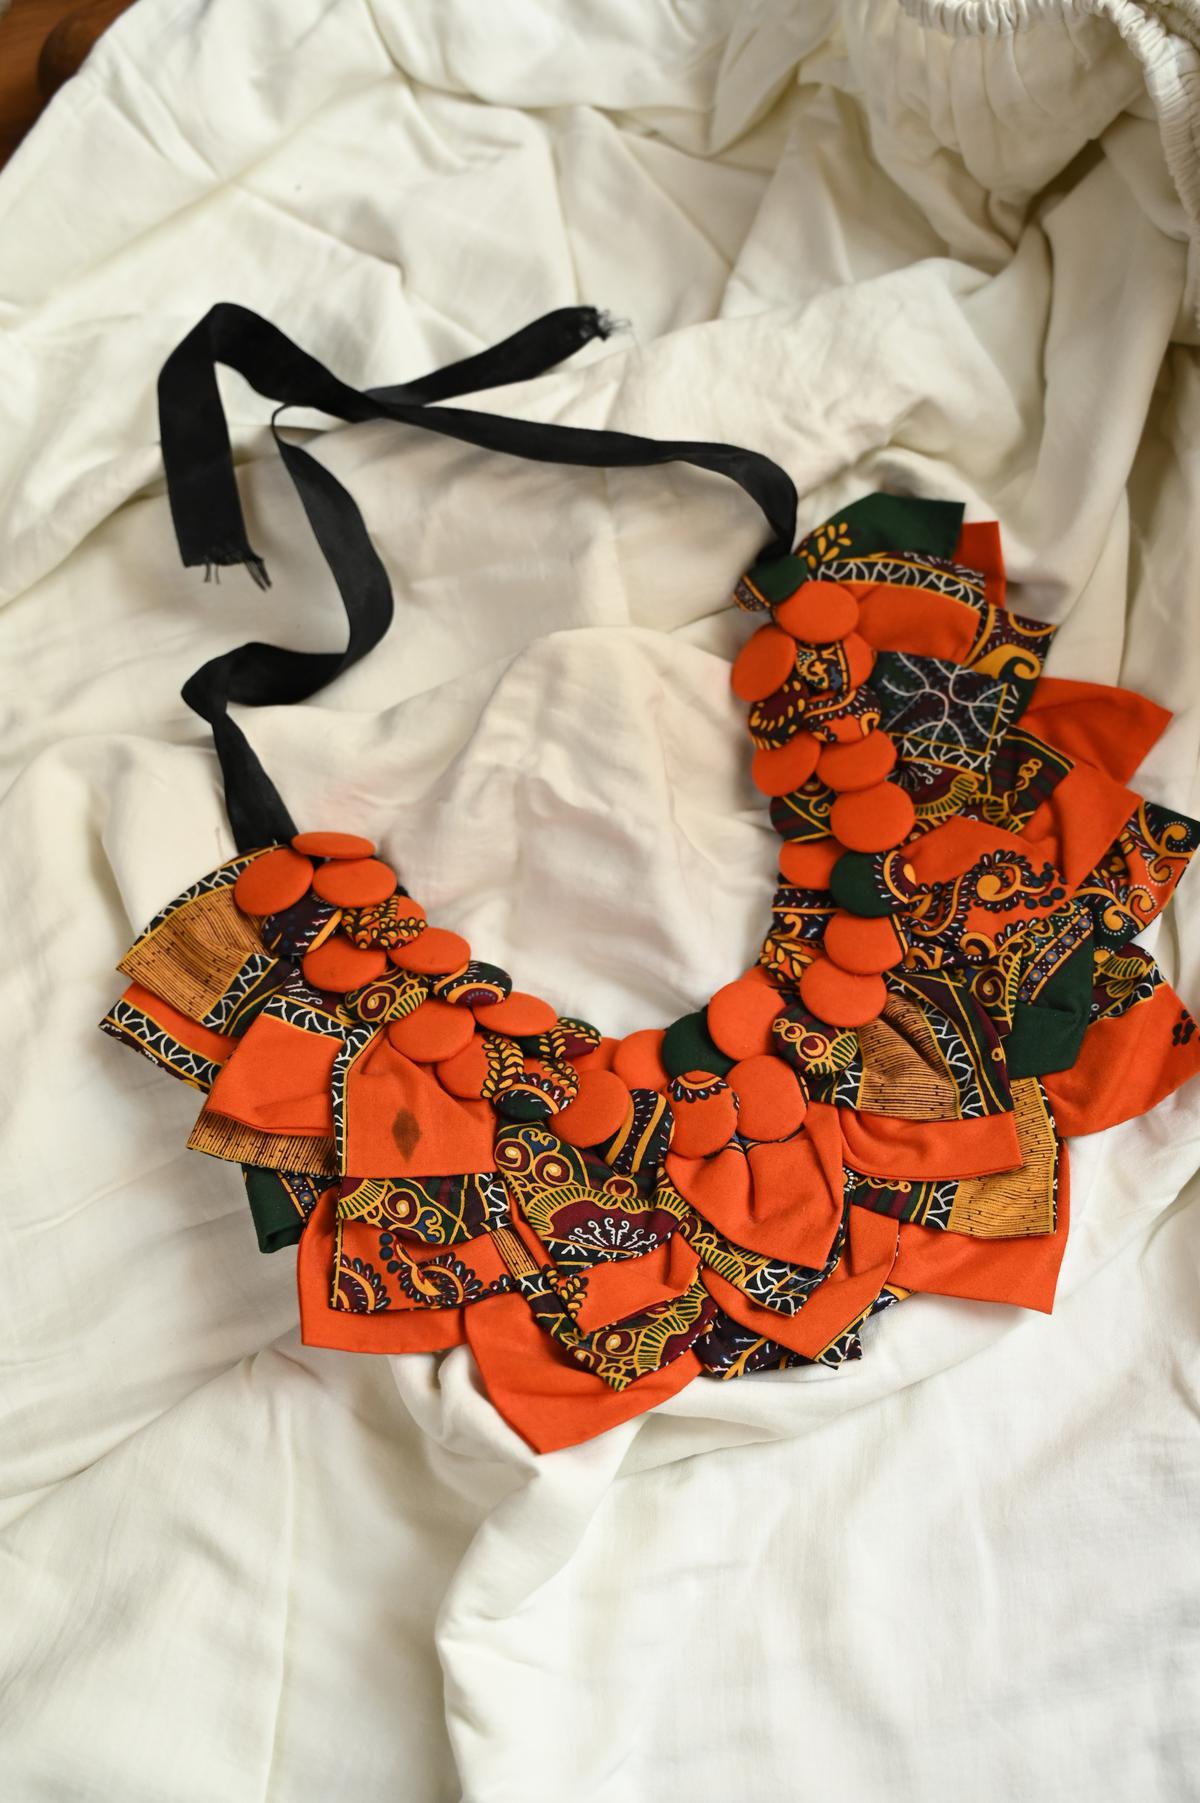 The bright orange Shweshwe fabric necklace from Cape Town.